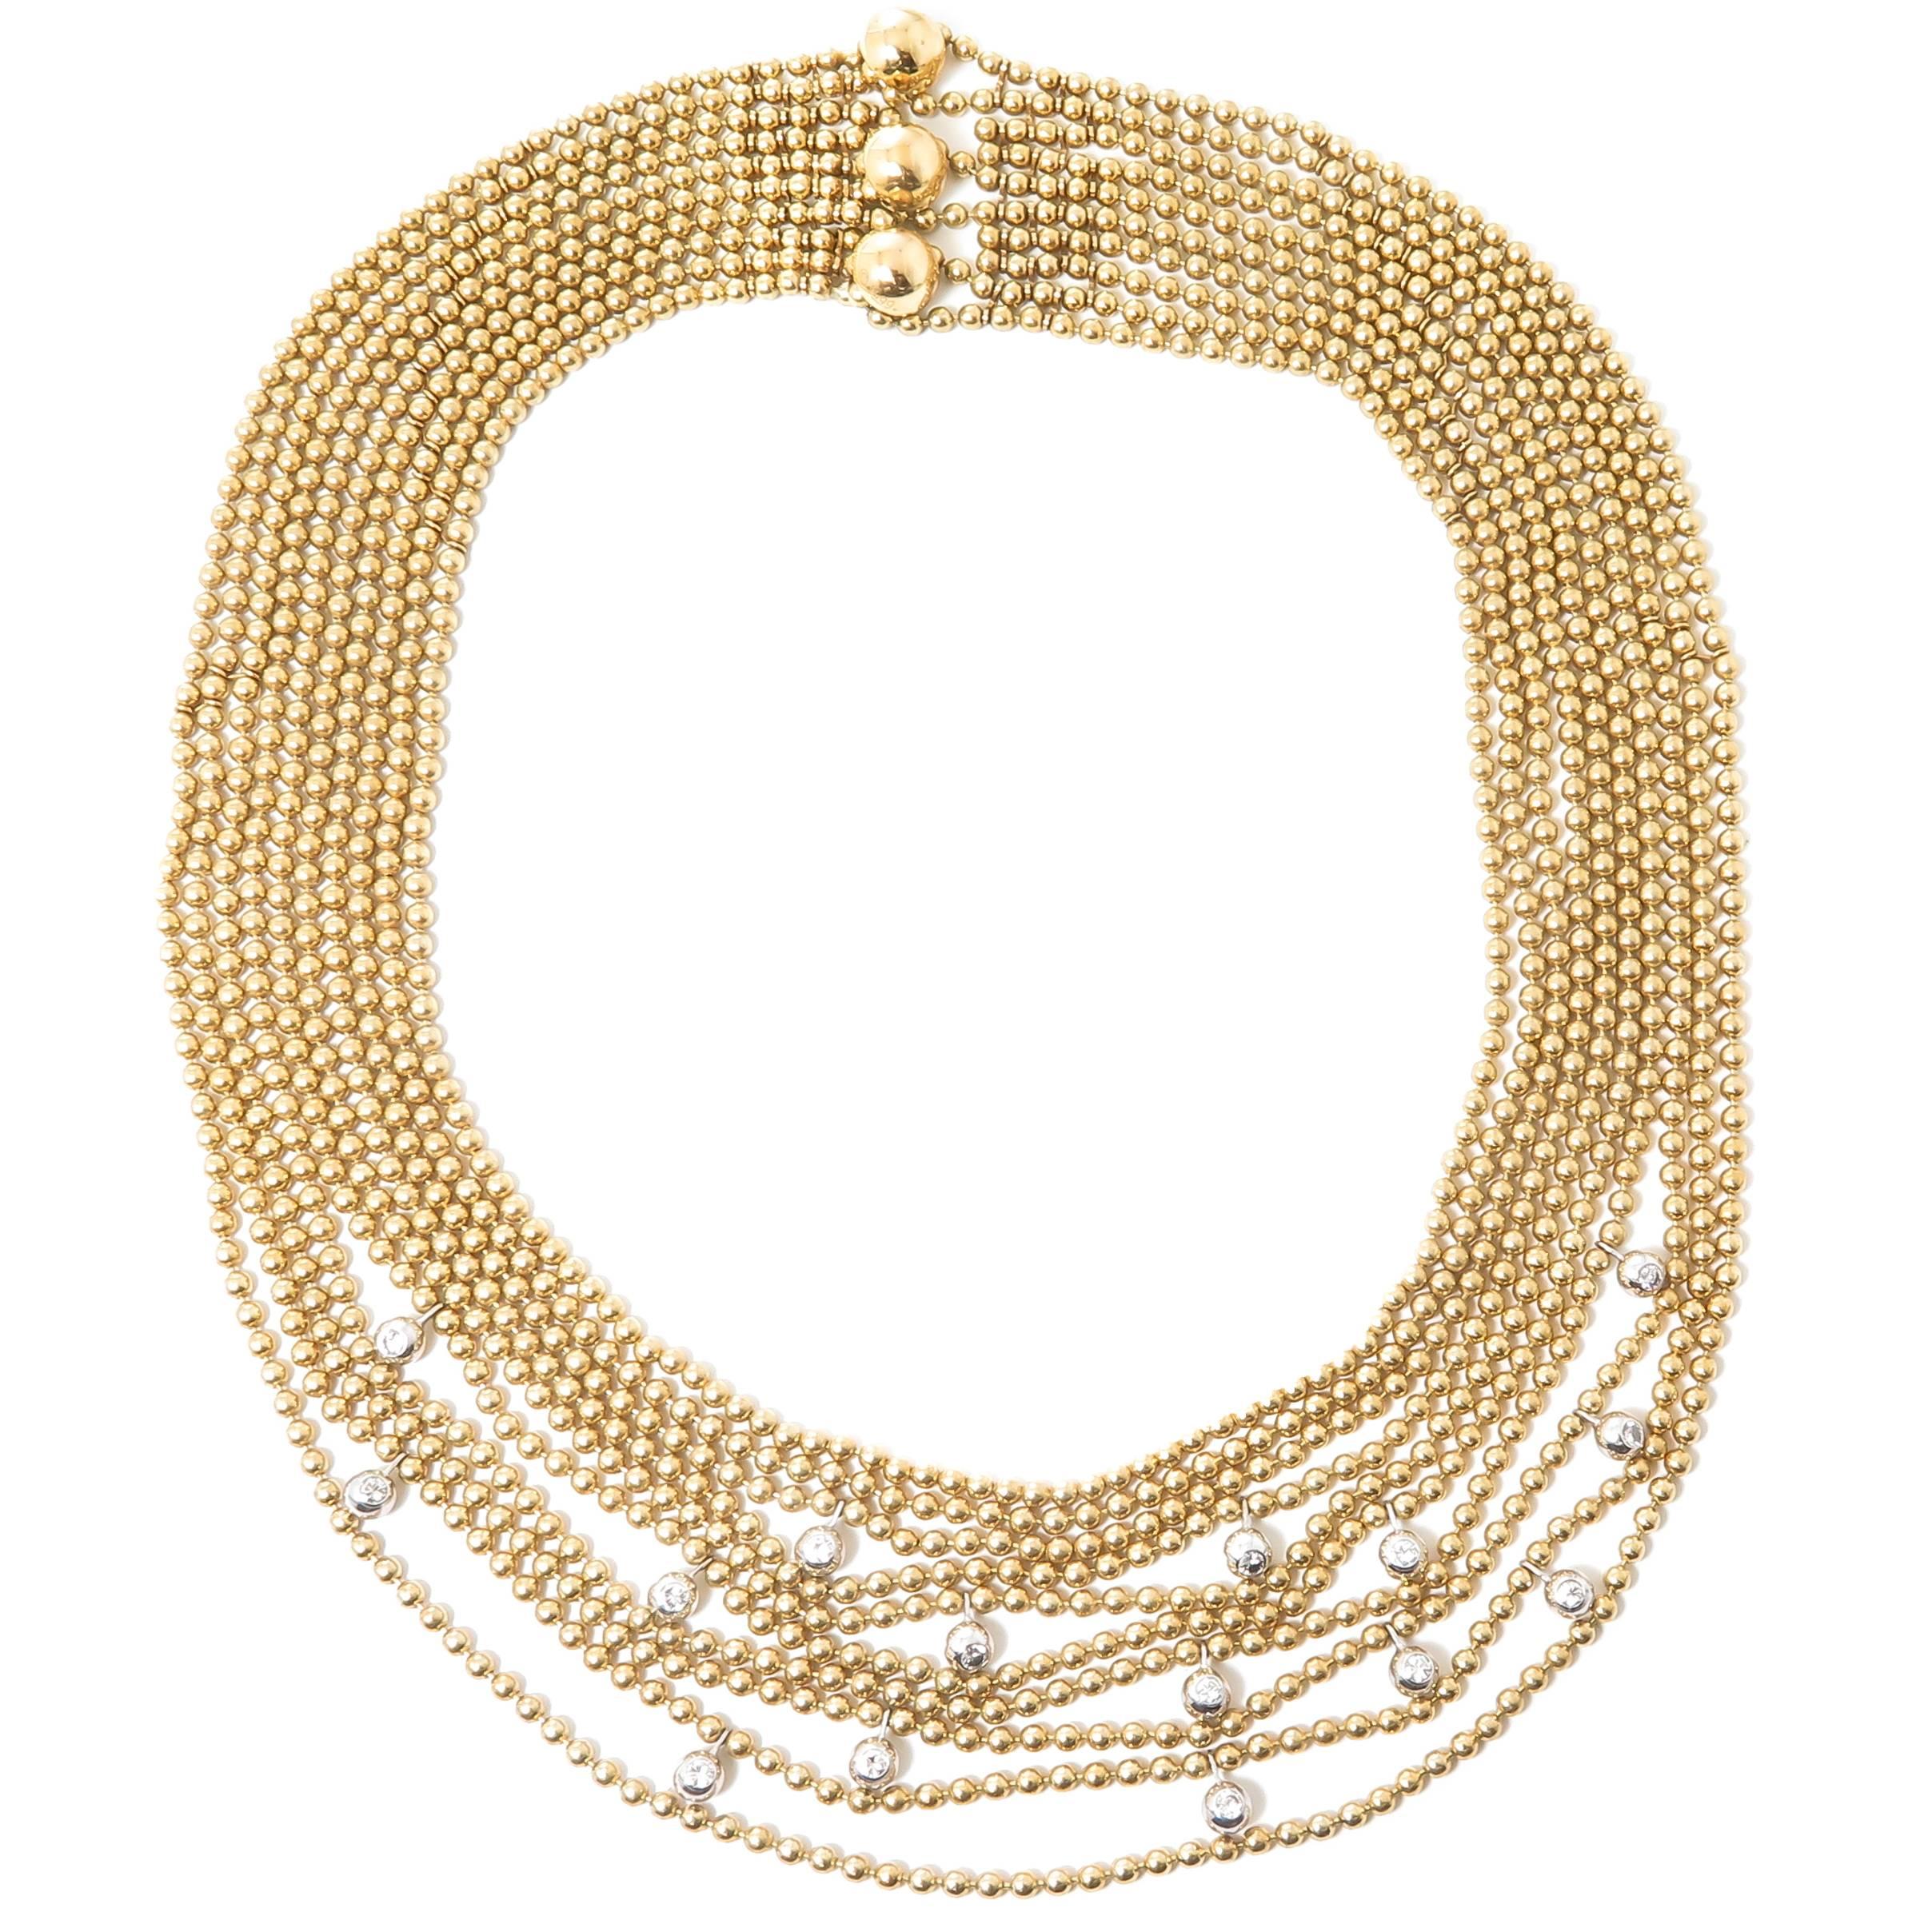 Circa 2000 Cartier 18K Yellow and White Gold Draperie De Decolette Necklace, 10 Strands of 2 MM Round Gold Beads and 15 random set White Gold 4 MM beads each set with a Round brilliant cut Diamond, Diamond total approximately 1 Carat. Neck Length